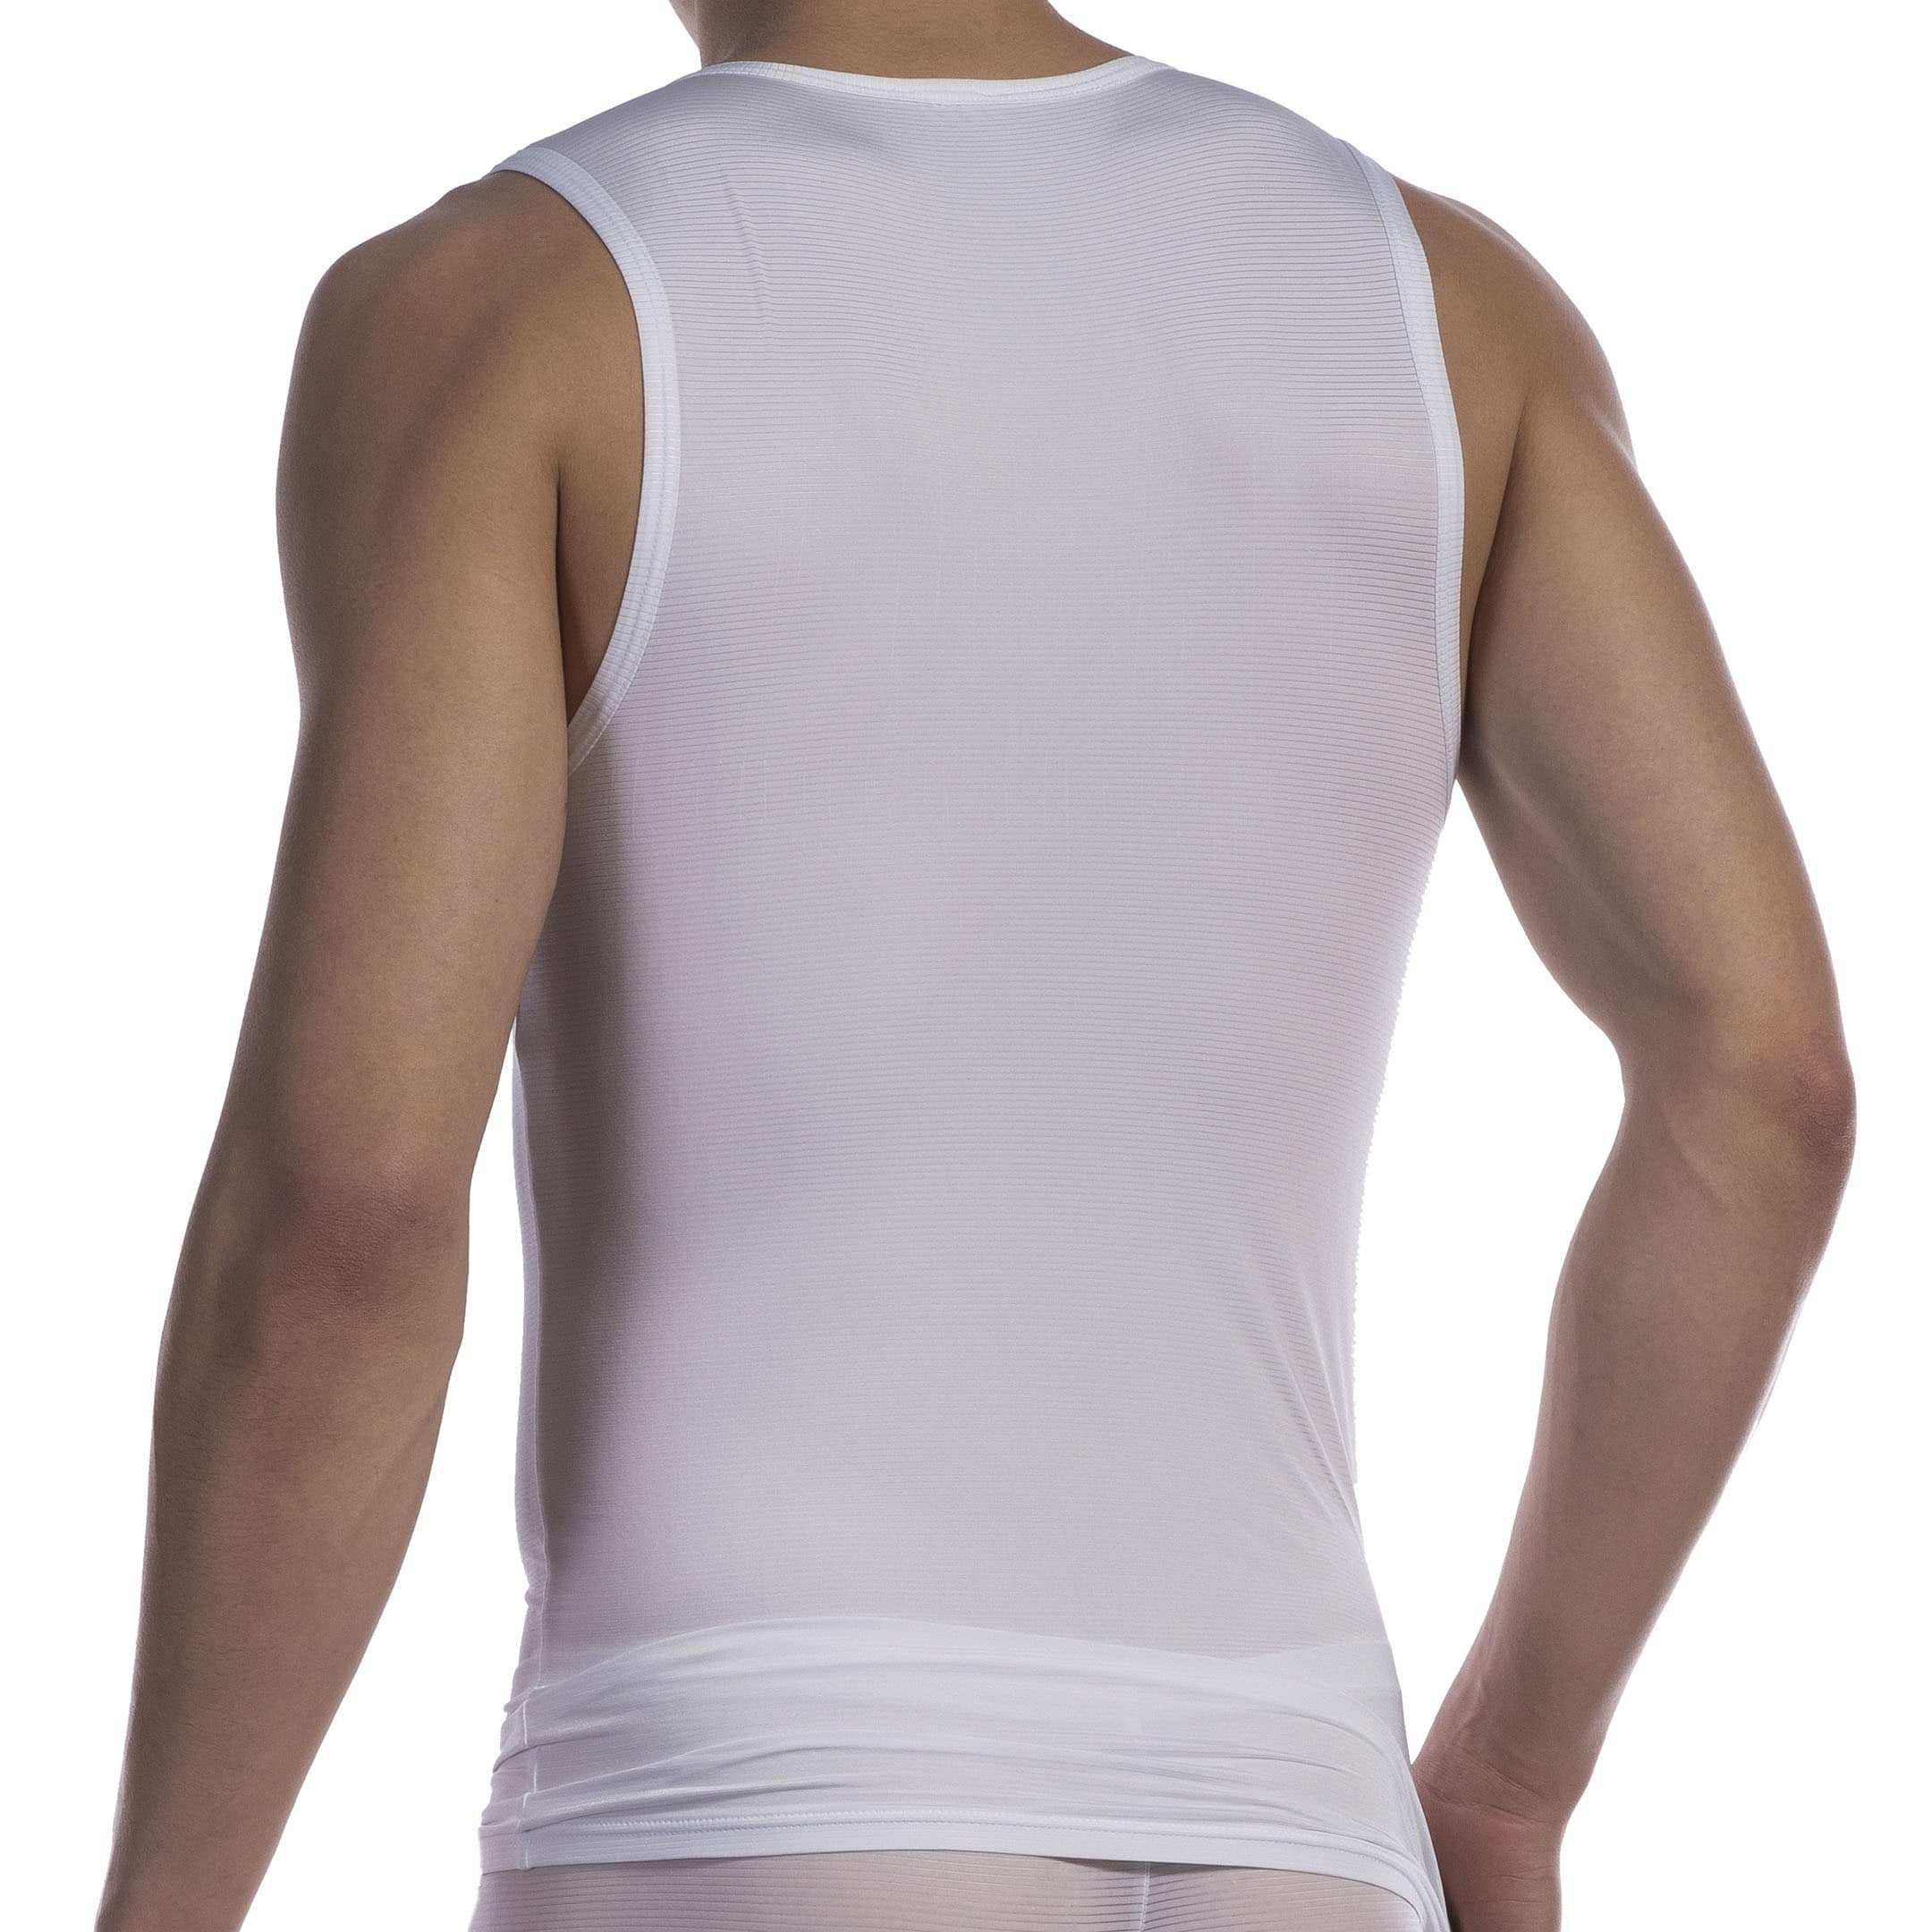 Firm Compression Tank Top - White